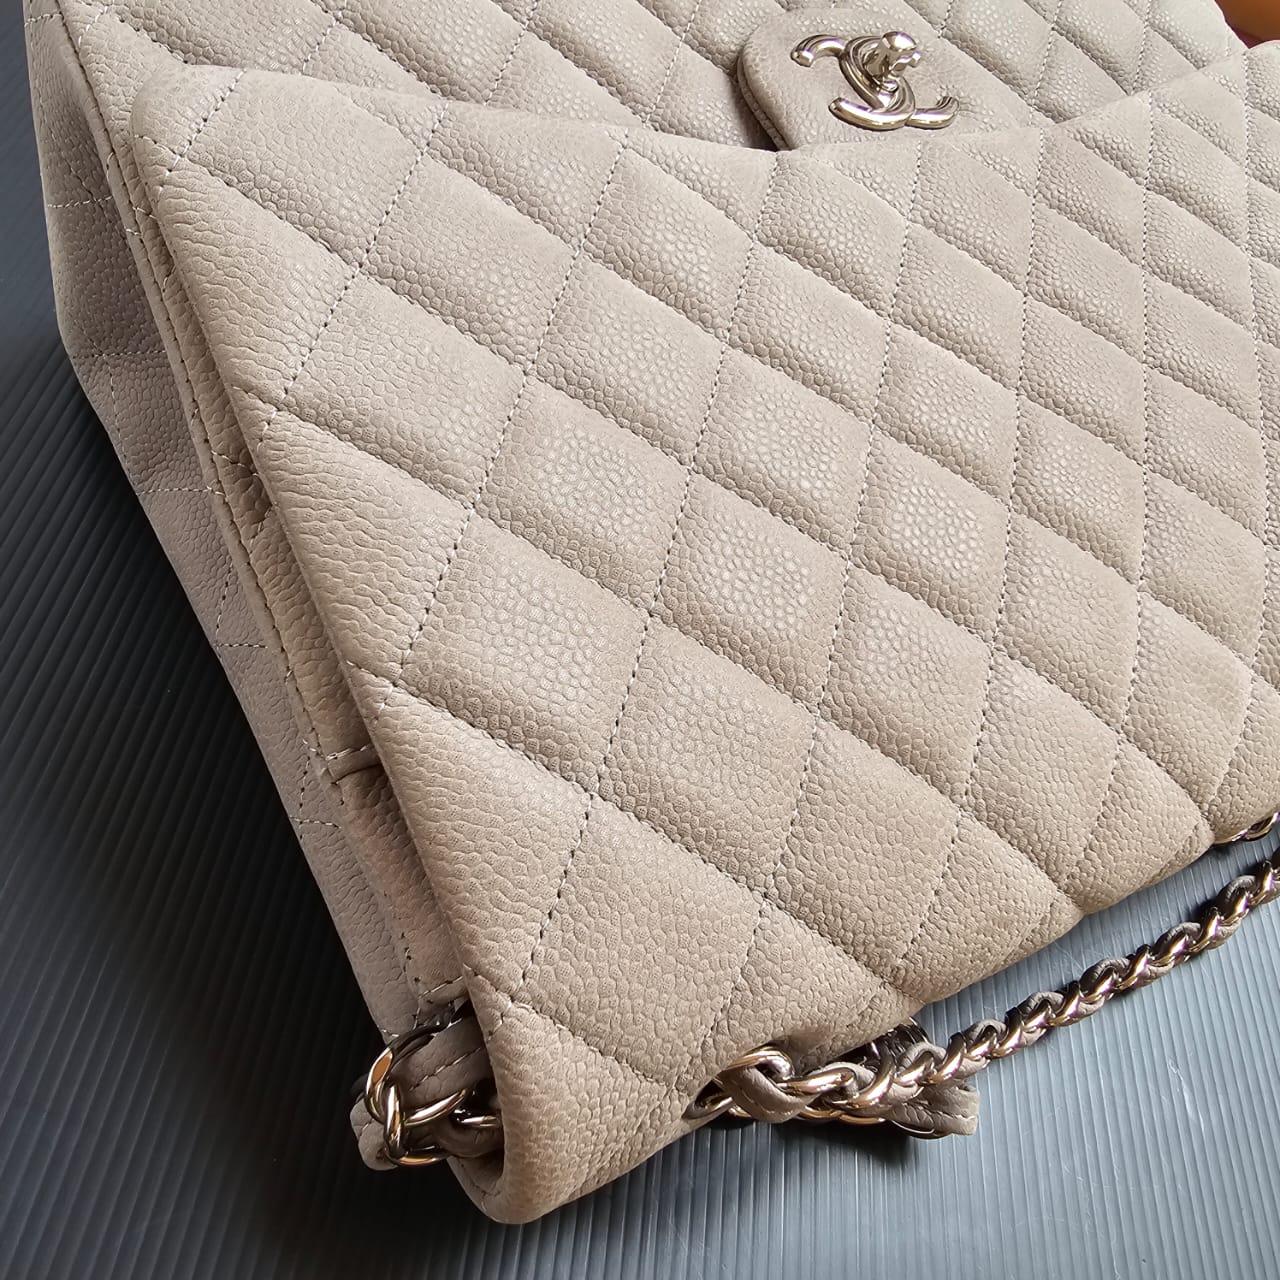 Chanel maxi in light grey suede caviar with silver hardware. Overall still in excellent condition, no viisble rubbing whatsoever. Series #16. Comes with card and dust bag.